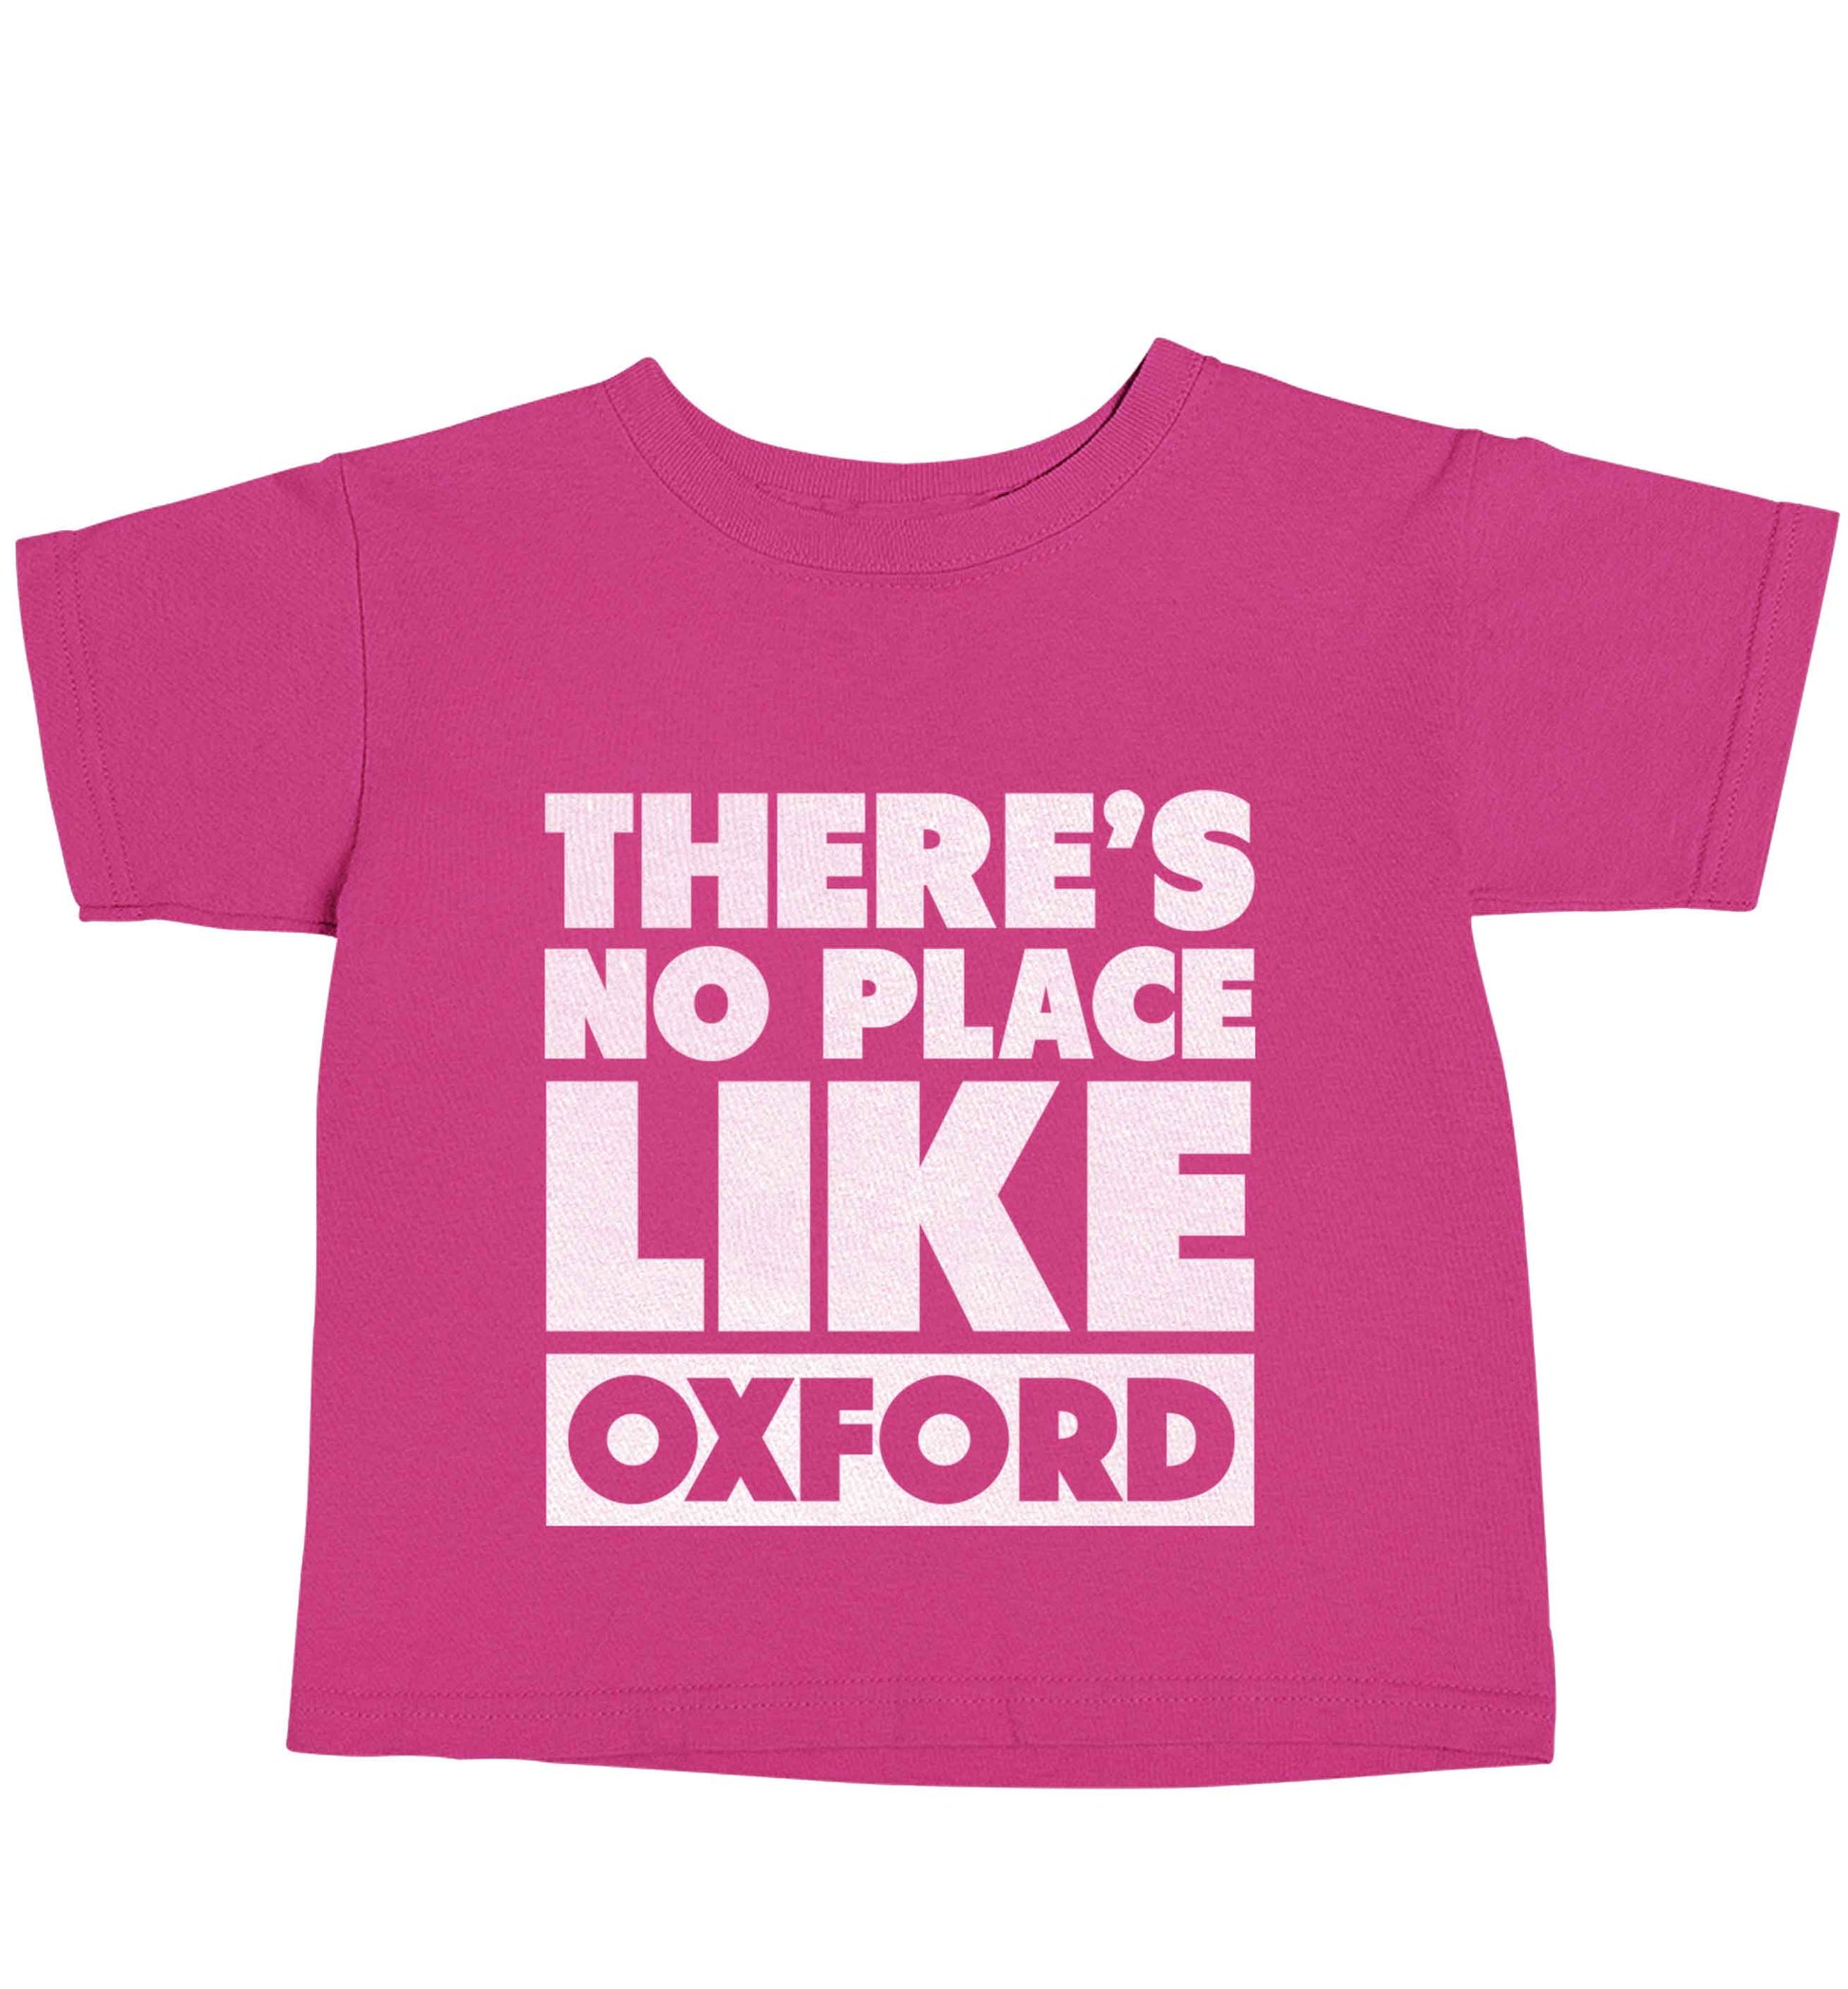 There's no place like Oxford pink baby toddler Tshirt 2 Years